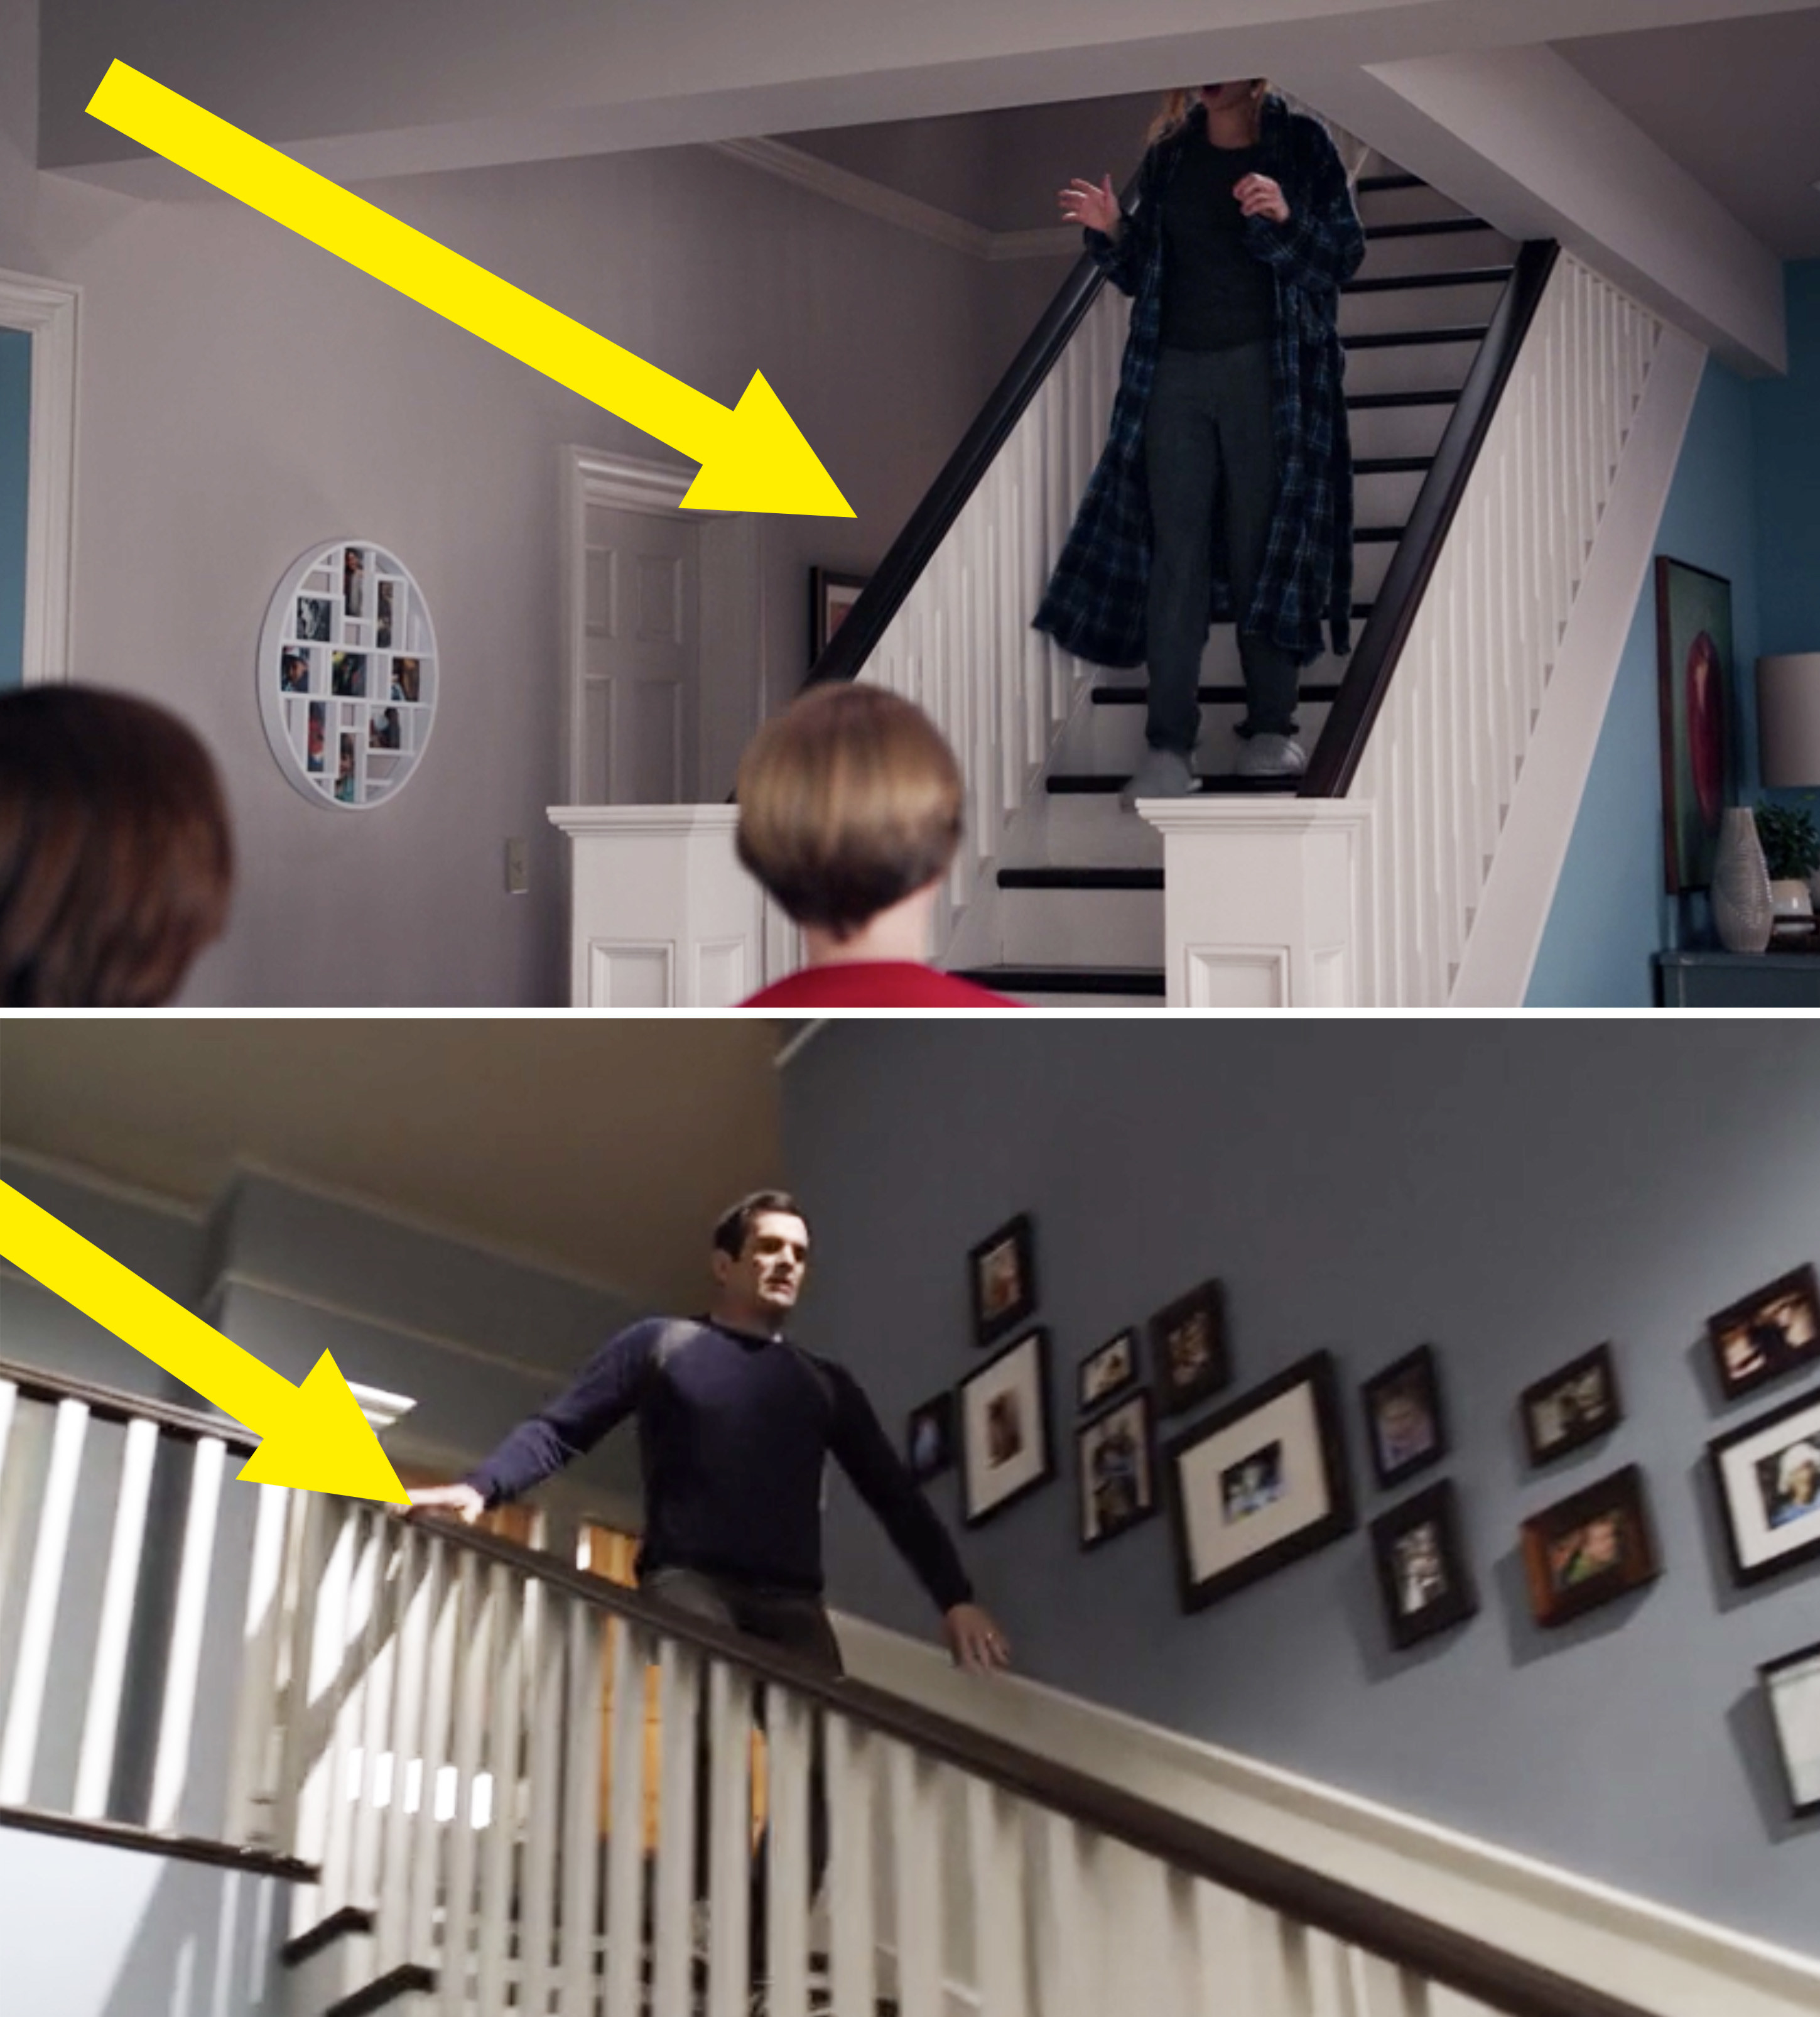 Wanda coming down a set of white stairs with a black handrail vs. Phil coming down the stairs in Modern Family